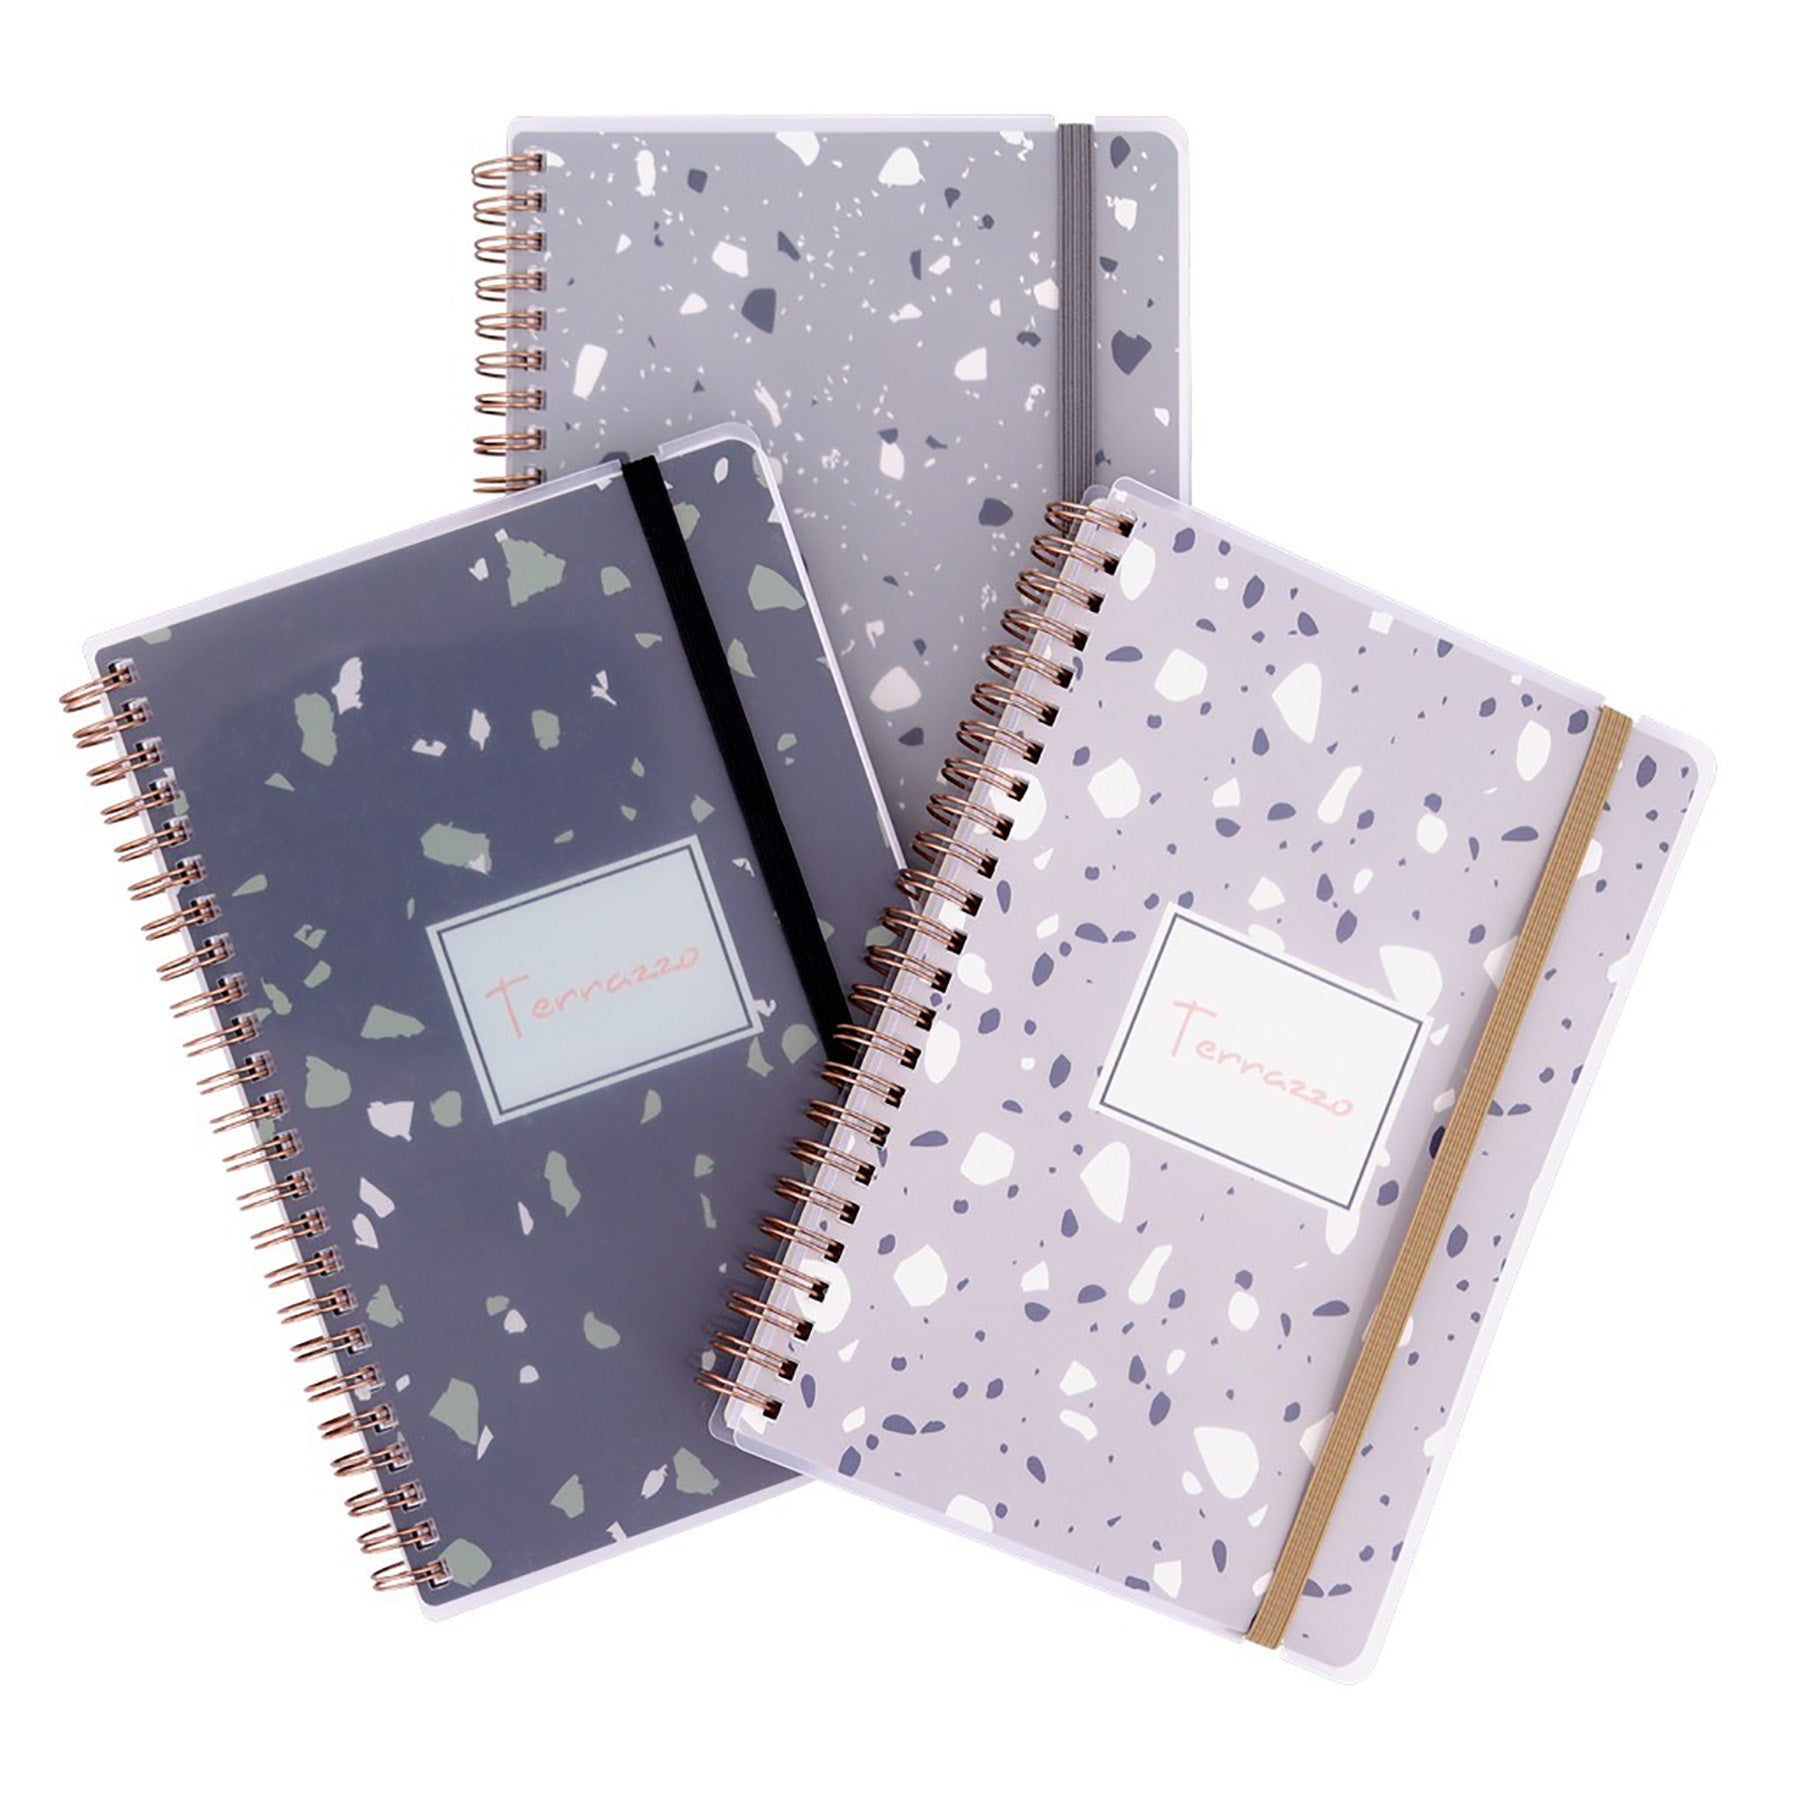 Offismart Notebook Terrazzo A5 192 Lined Pages 5.8x8.3in